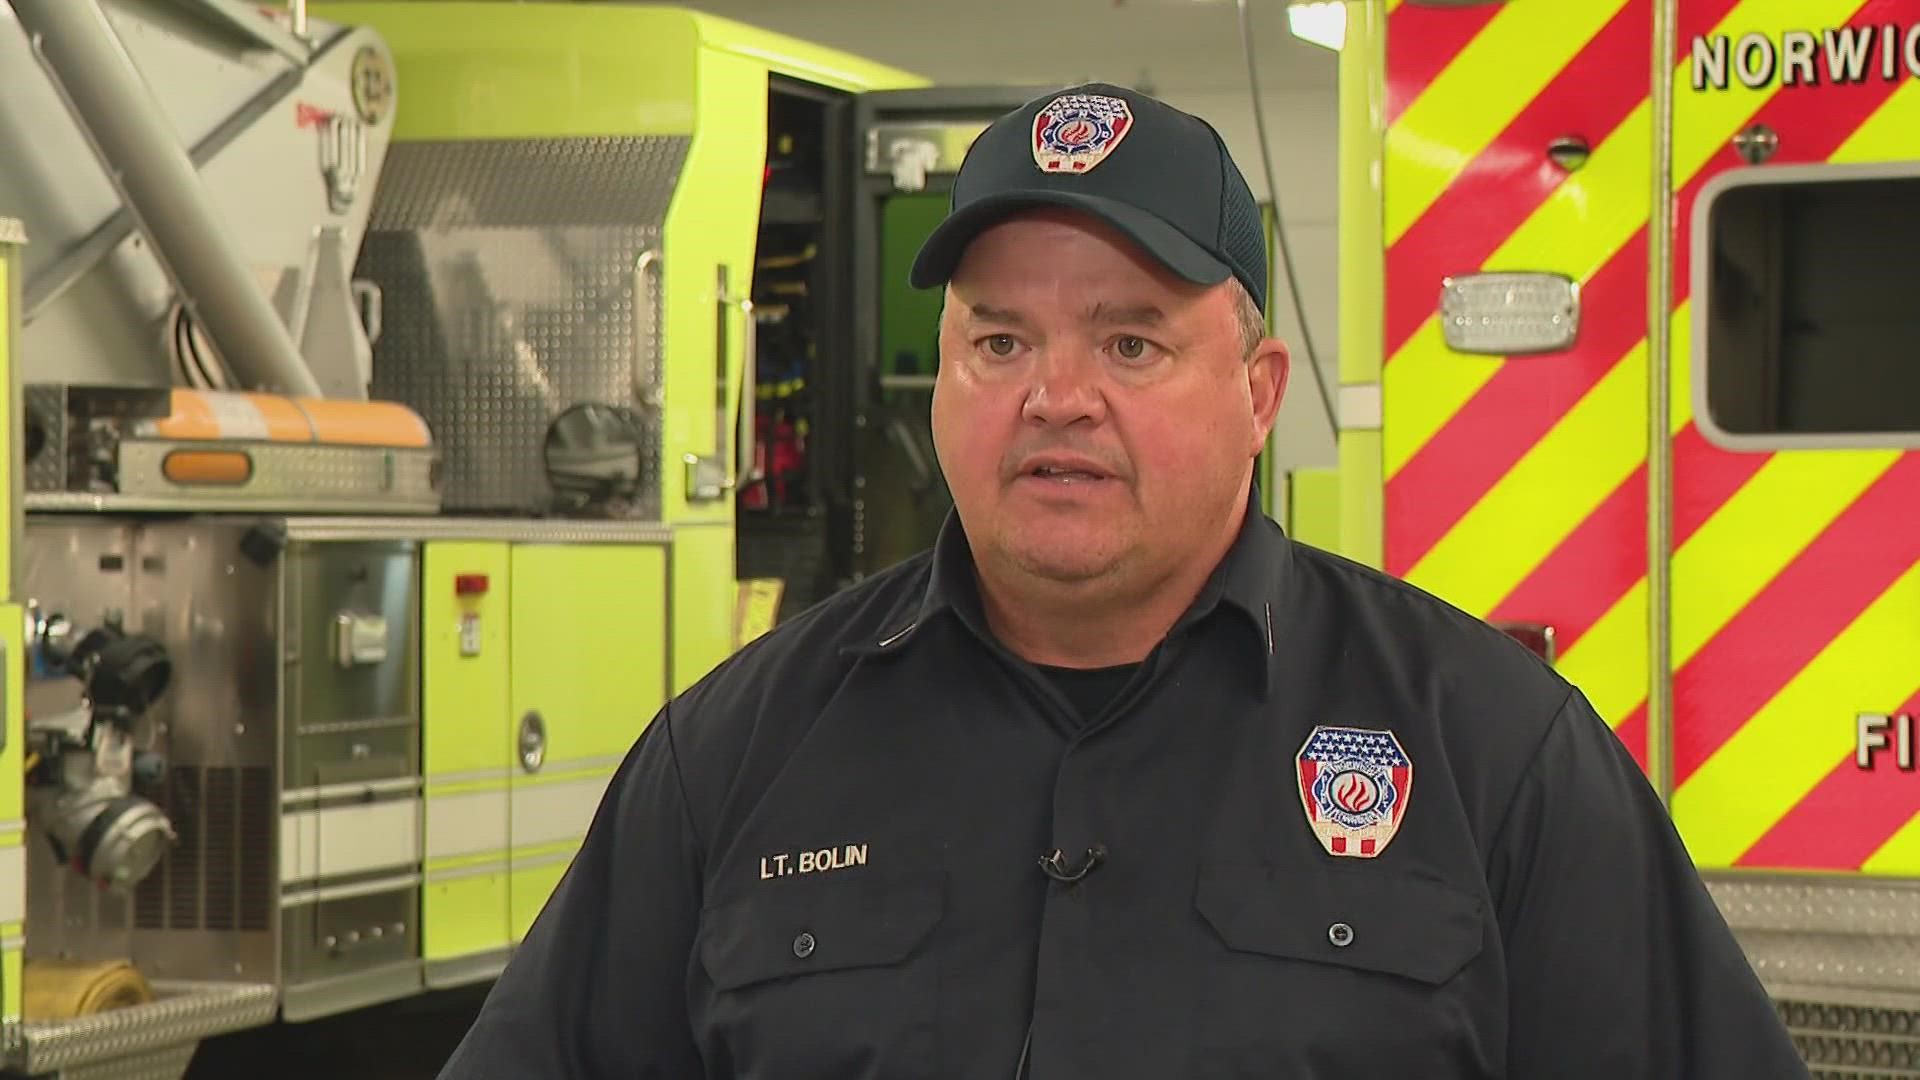 Lieutenant Tom Bolin has been a firefighter with the Norwich Township Fire Department for 27 years. Decades of helping others has taken a toll on him.